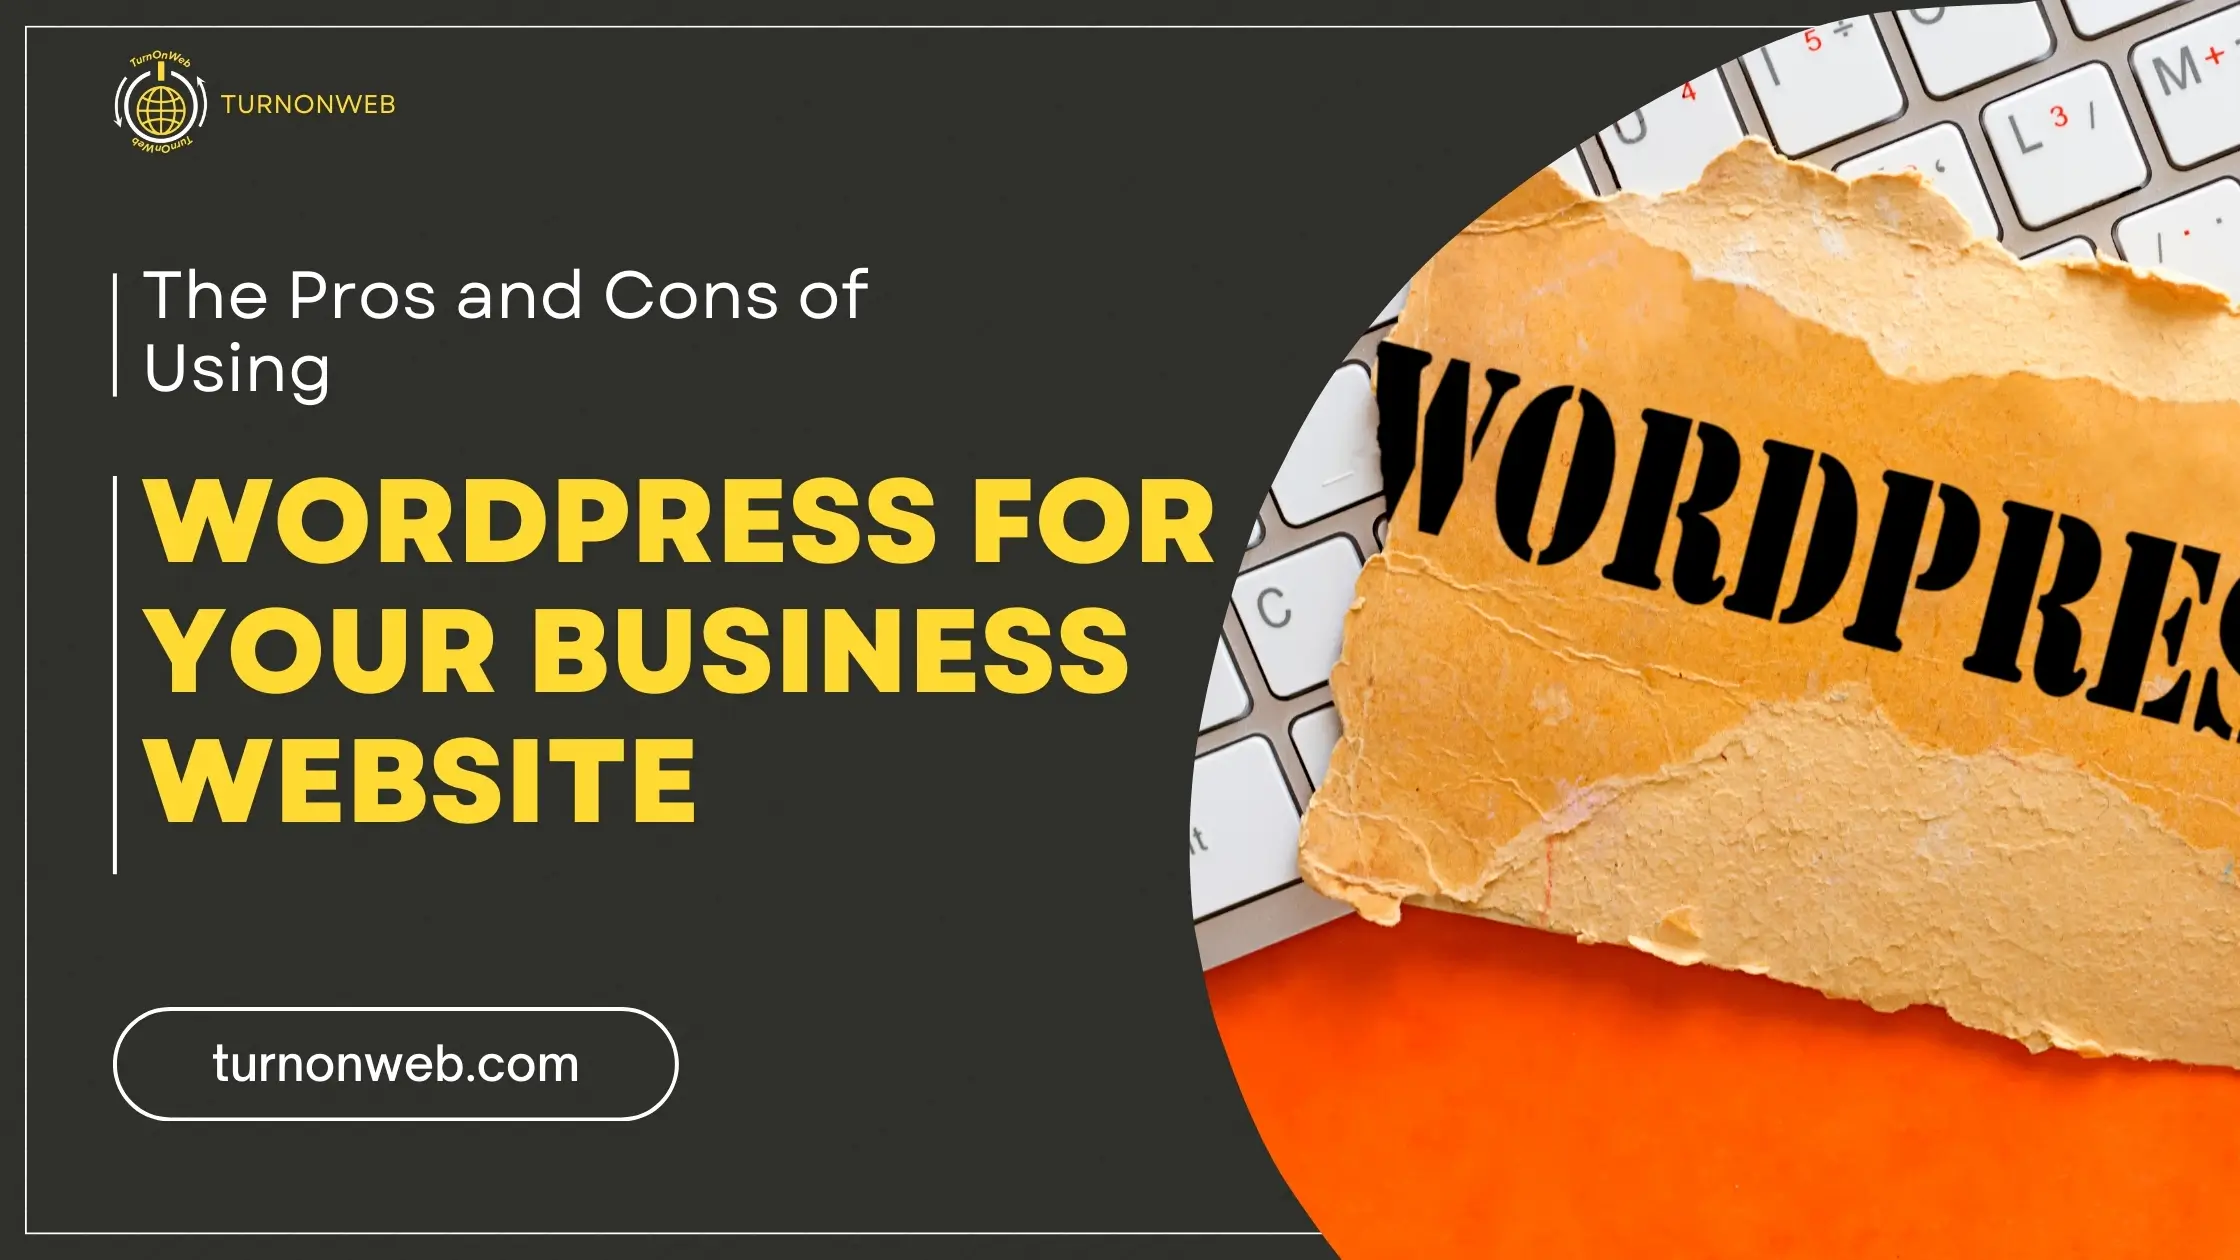 The Pros and Cons of Using WordPress for Your Business Website